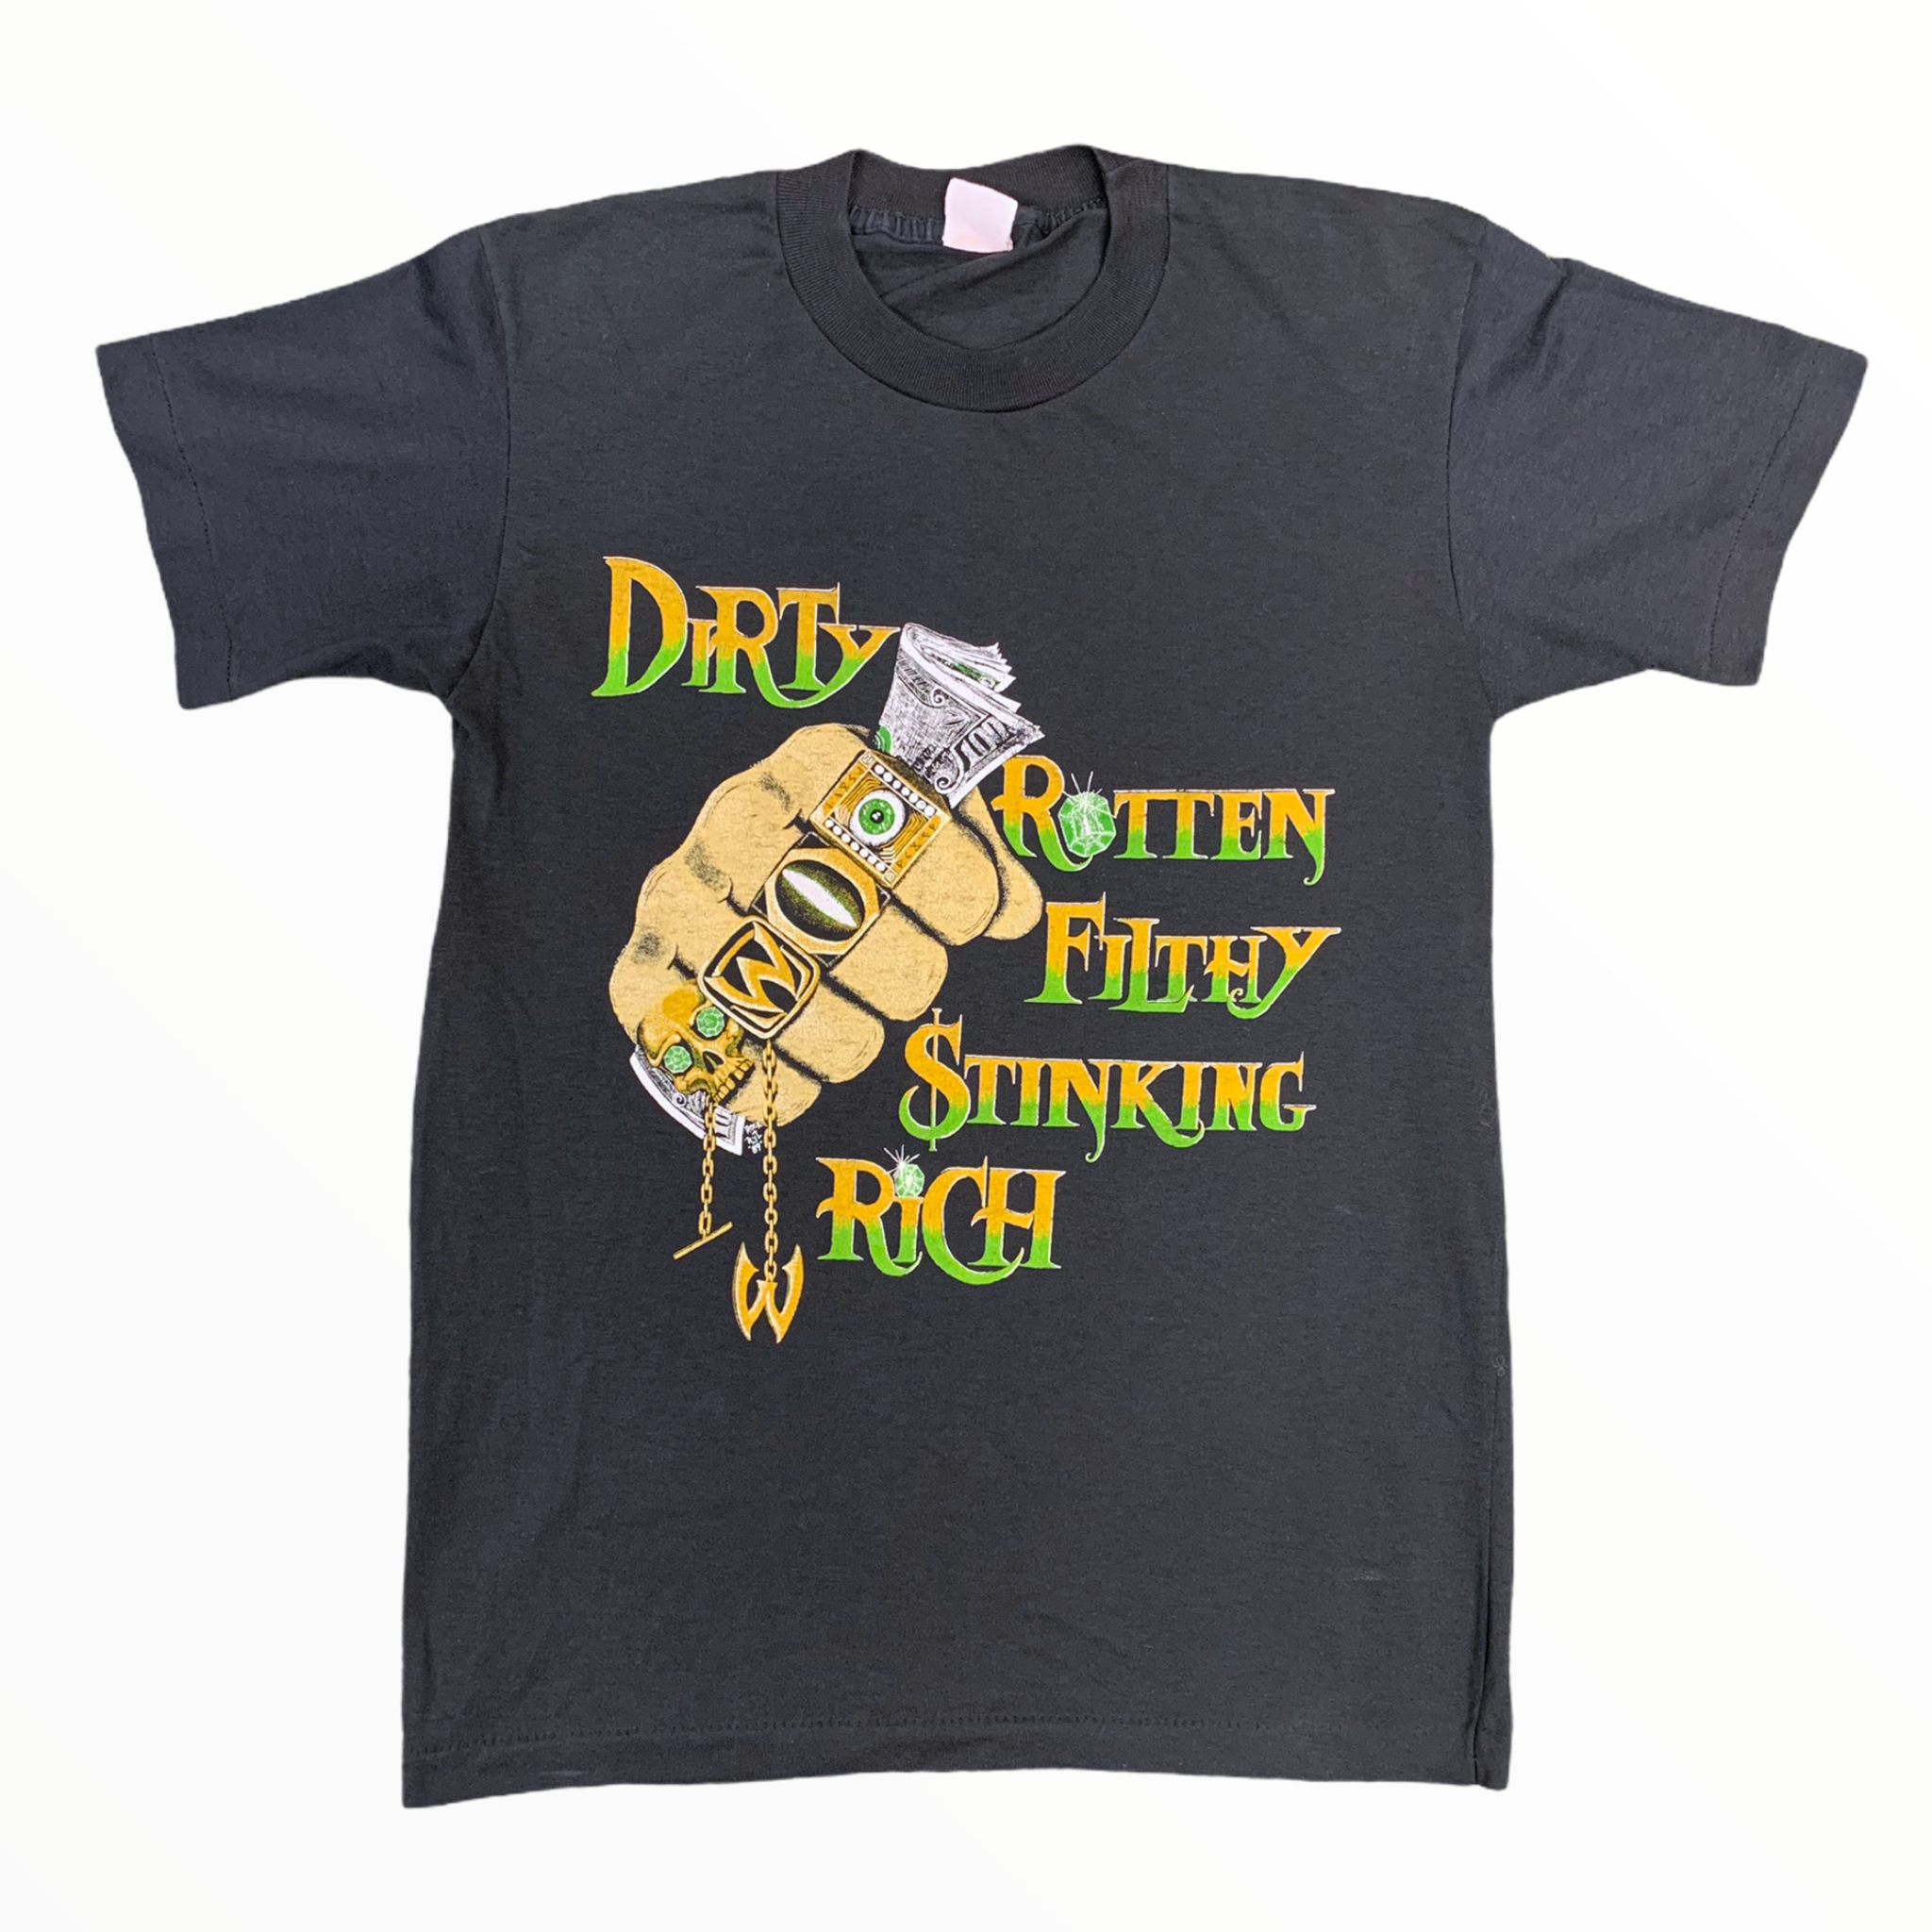 Vintage Warrant 'Dirty Rotten Filthy Stinking Rich' Bootleg Band T-Shirt - Faded Black - S